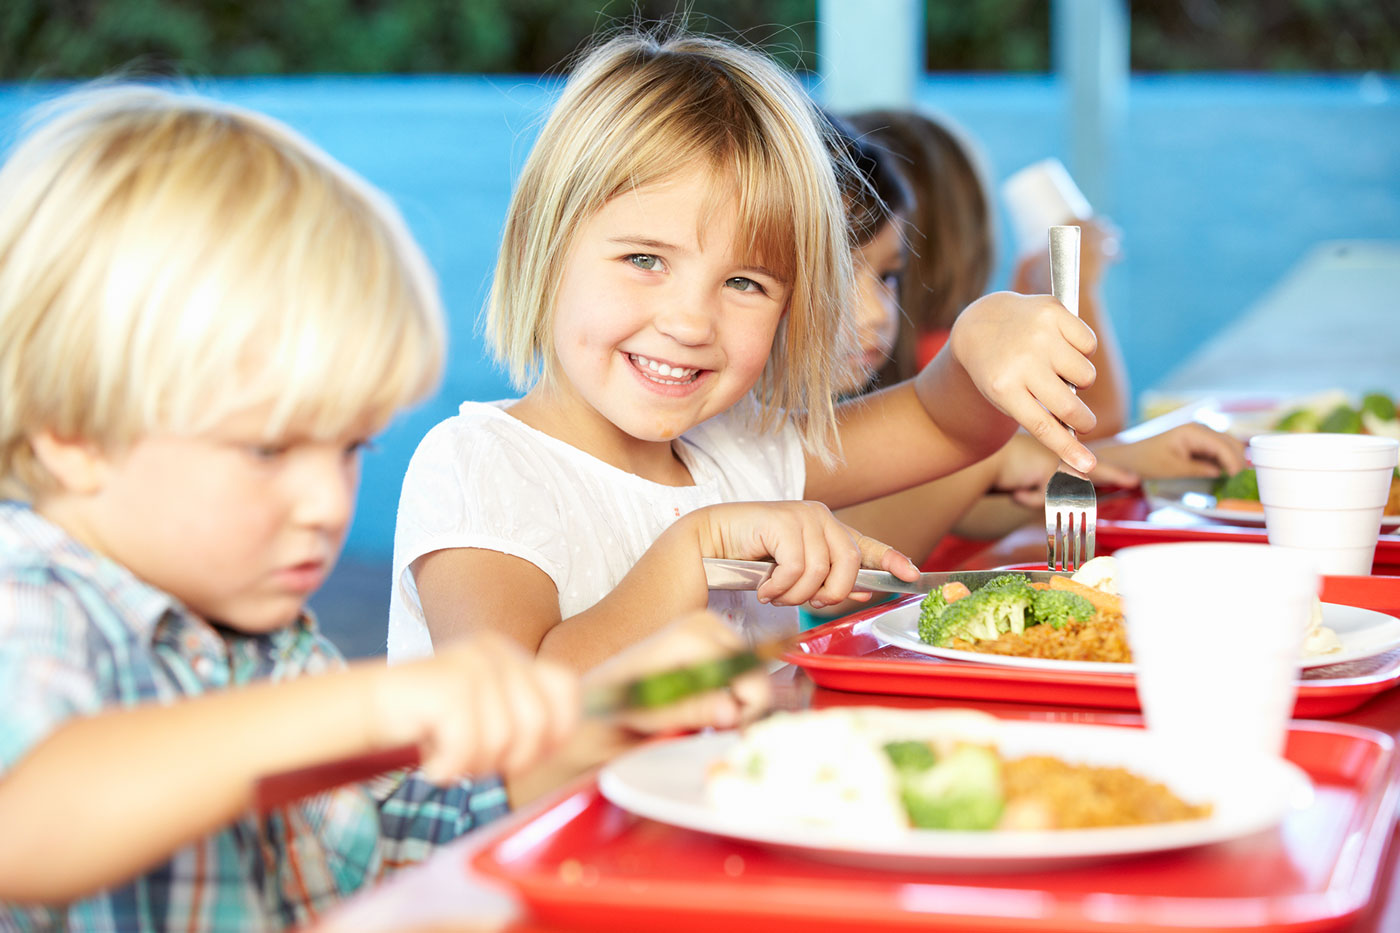 A child enjoying some food from our menu